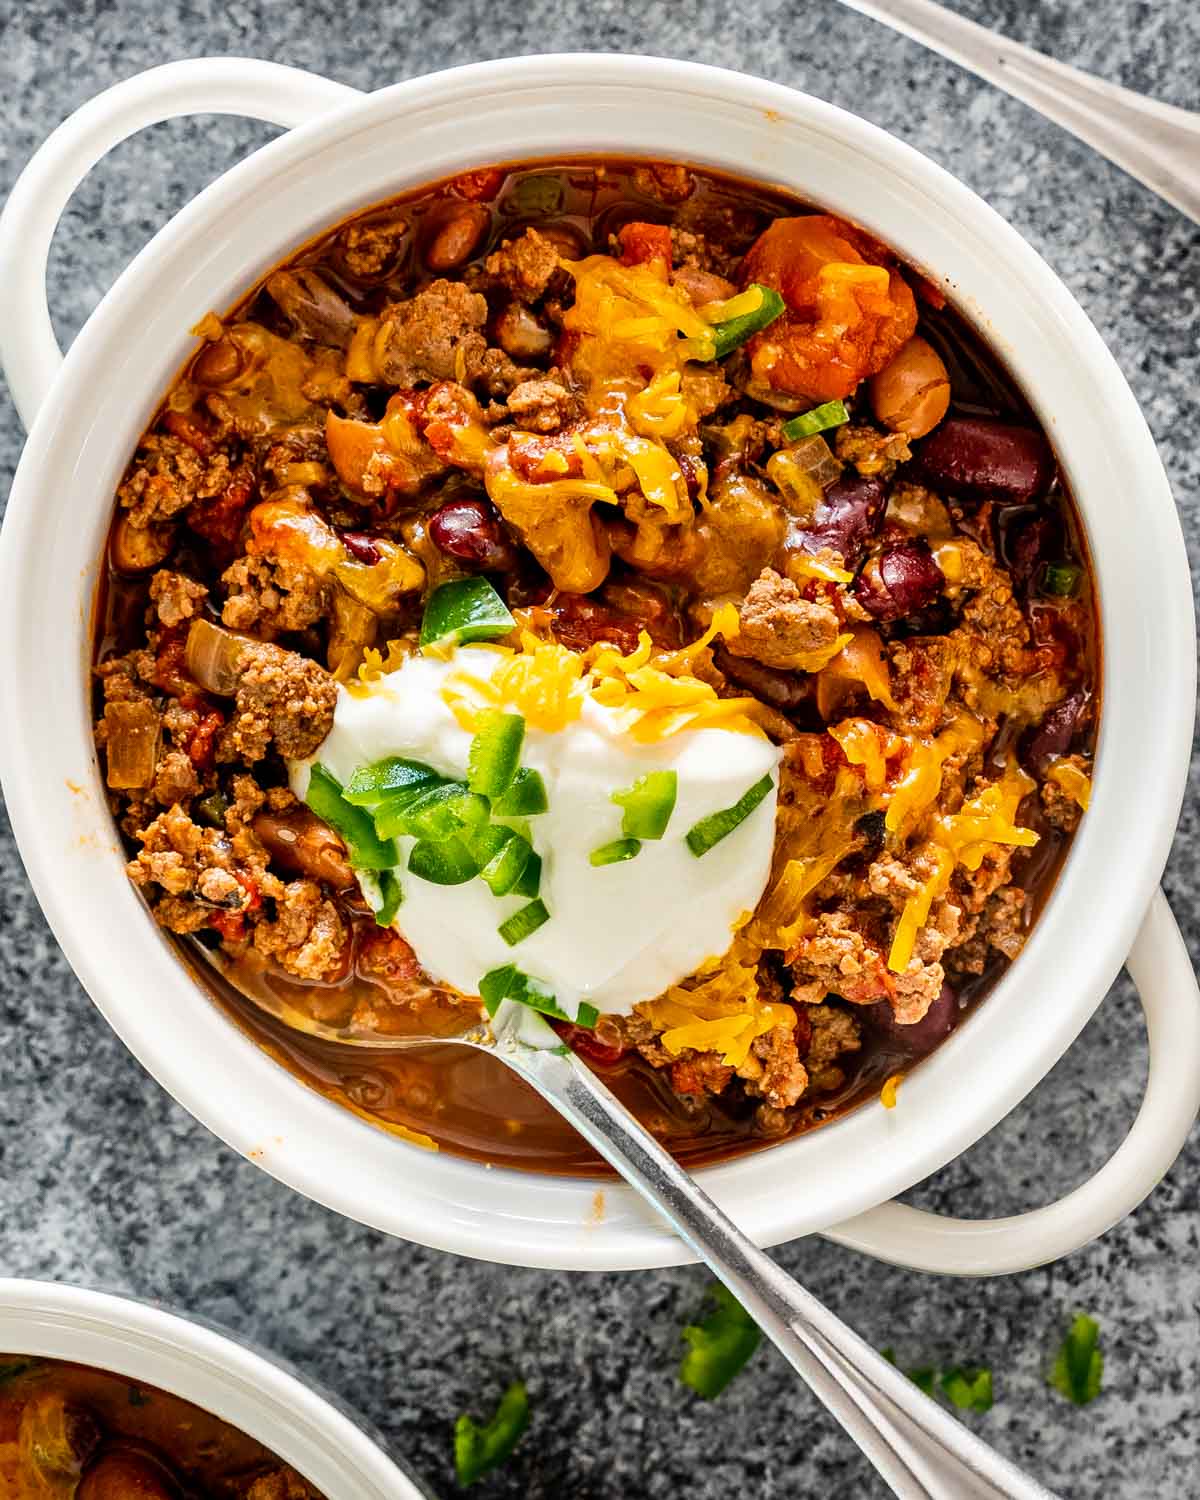 chili in a bowl topped with cheddar cheese and sour cream.